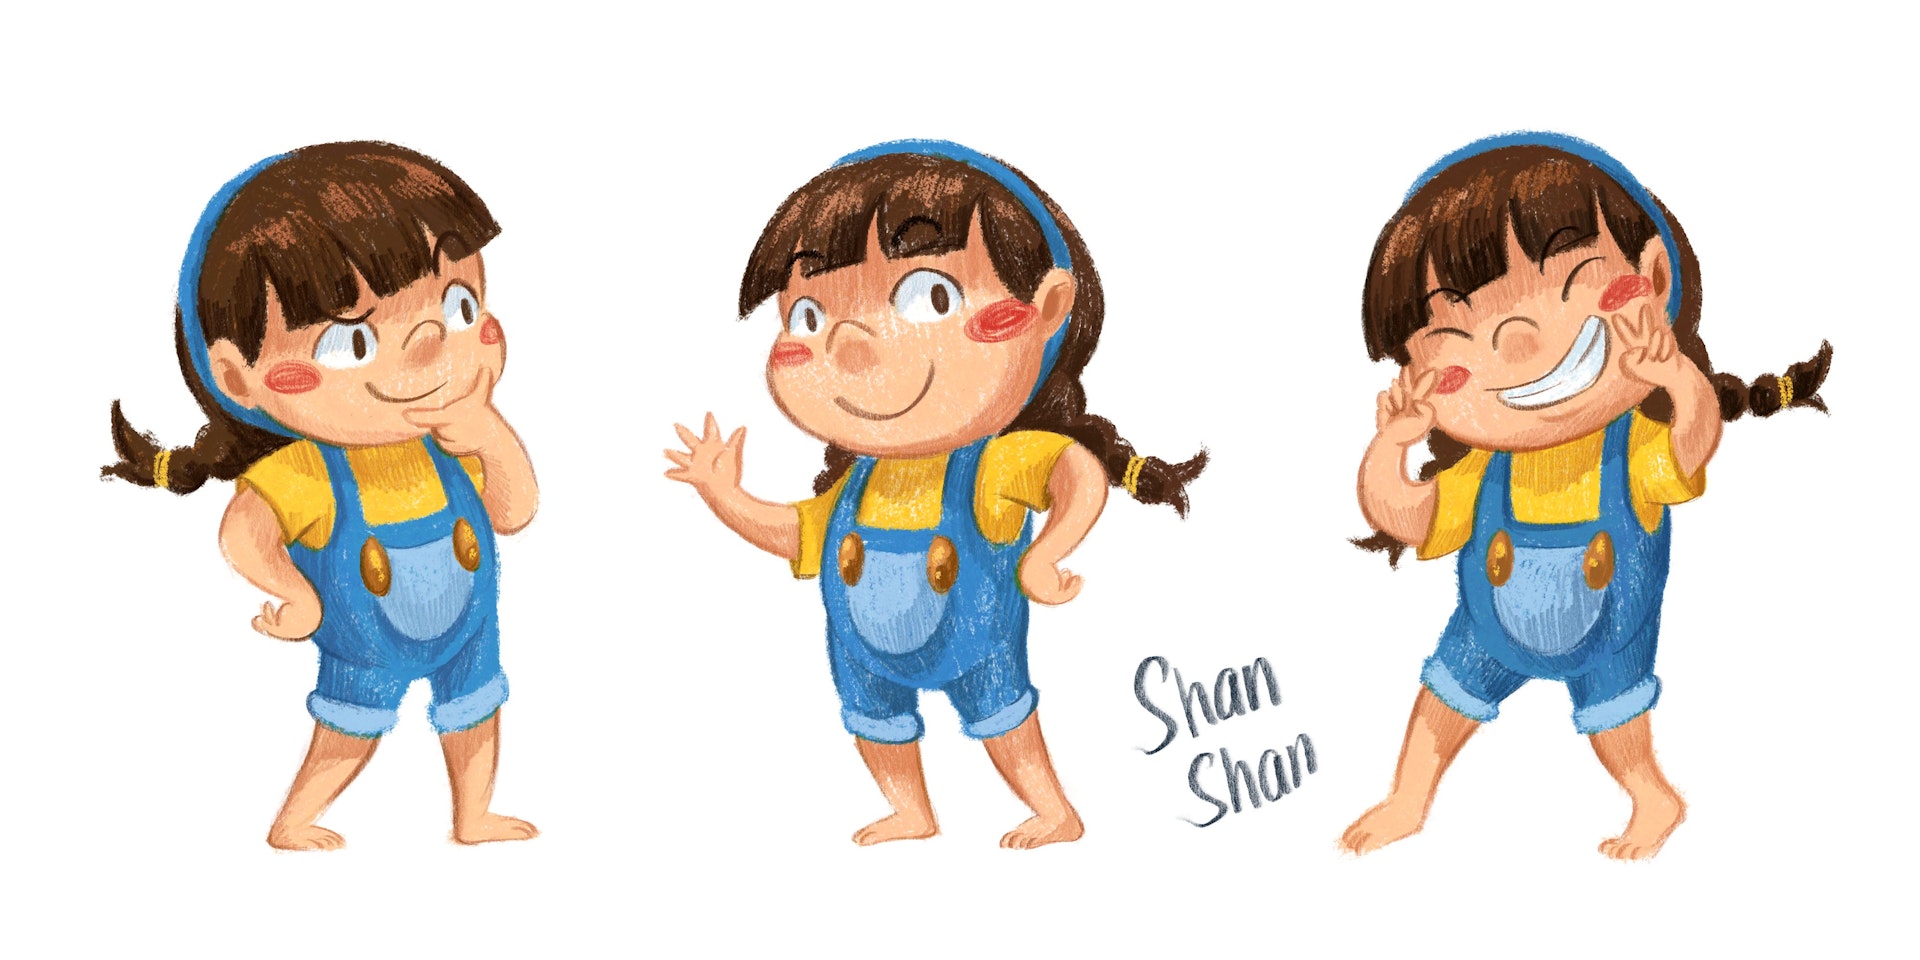 Illustrations of Shan Shan in three different poses